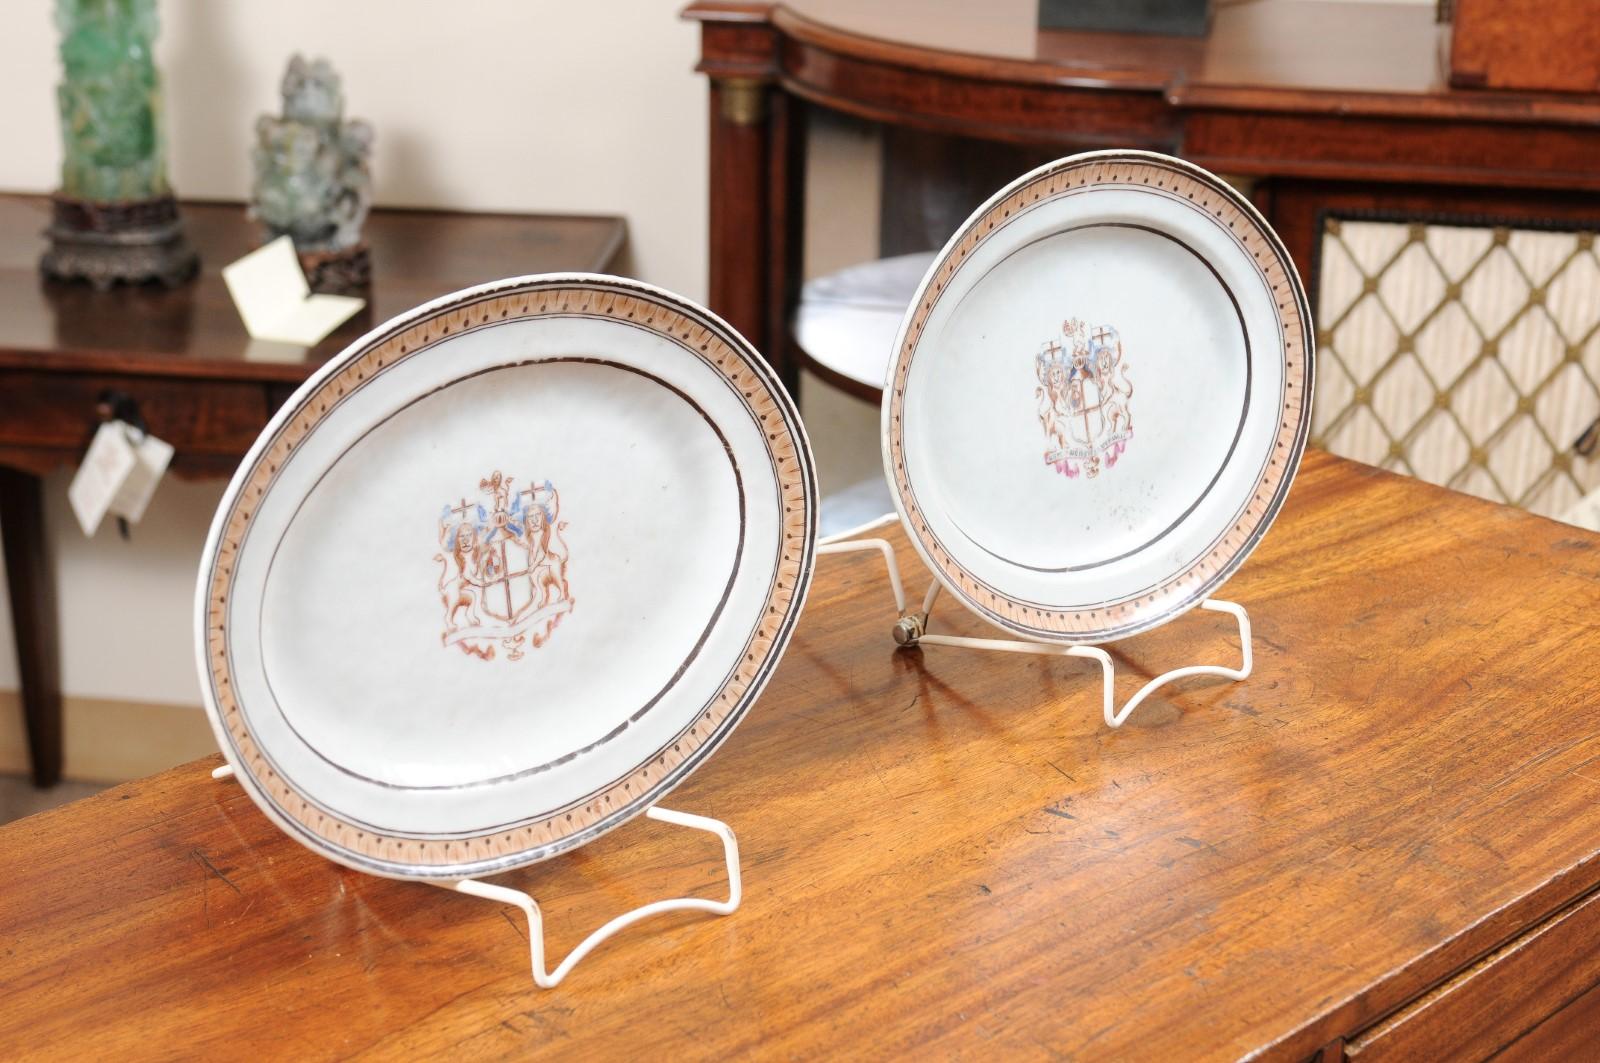 Pair of 18th Century Chinese Export Porcelain Platters with Armorial Crests For Sale 8